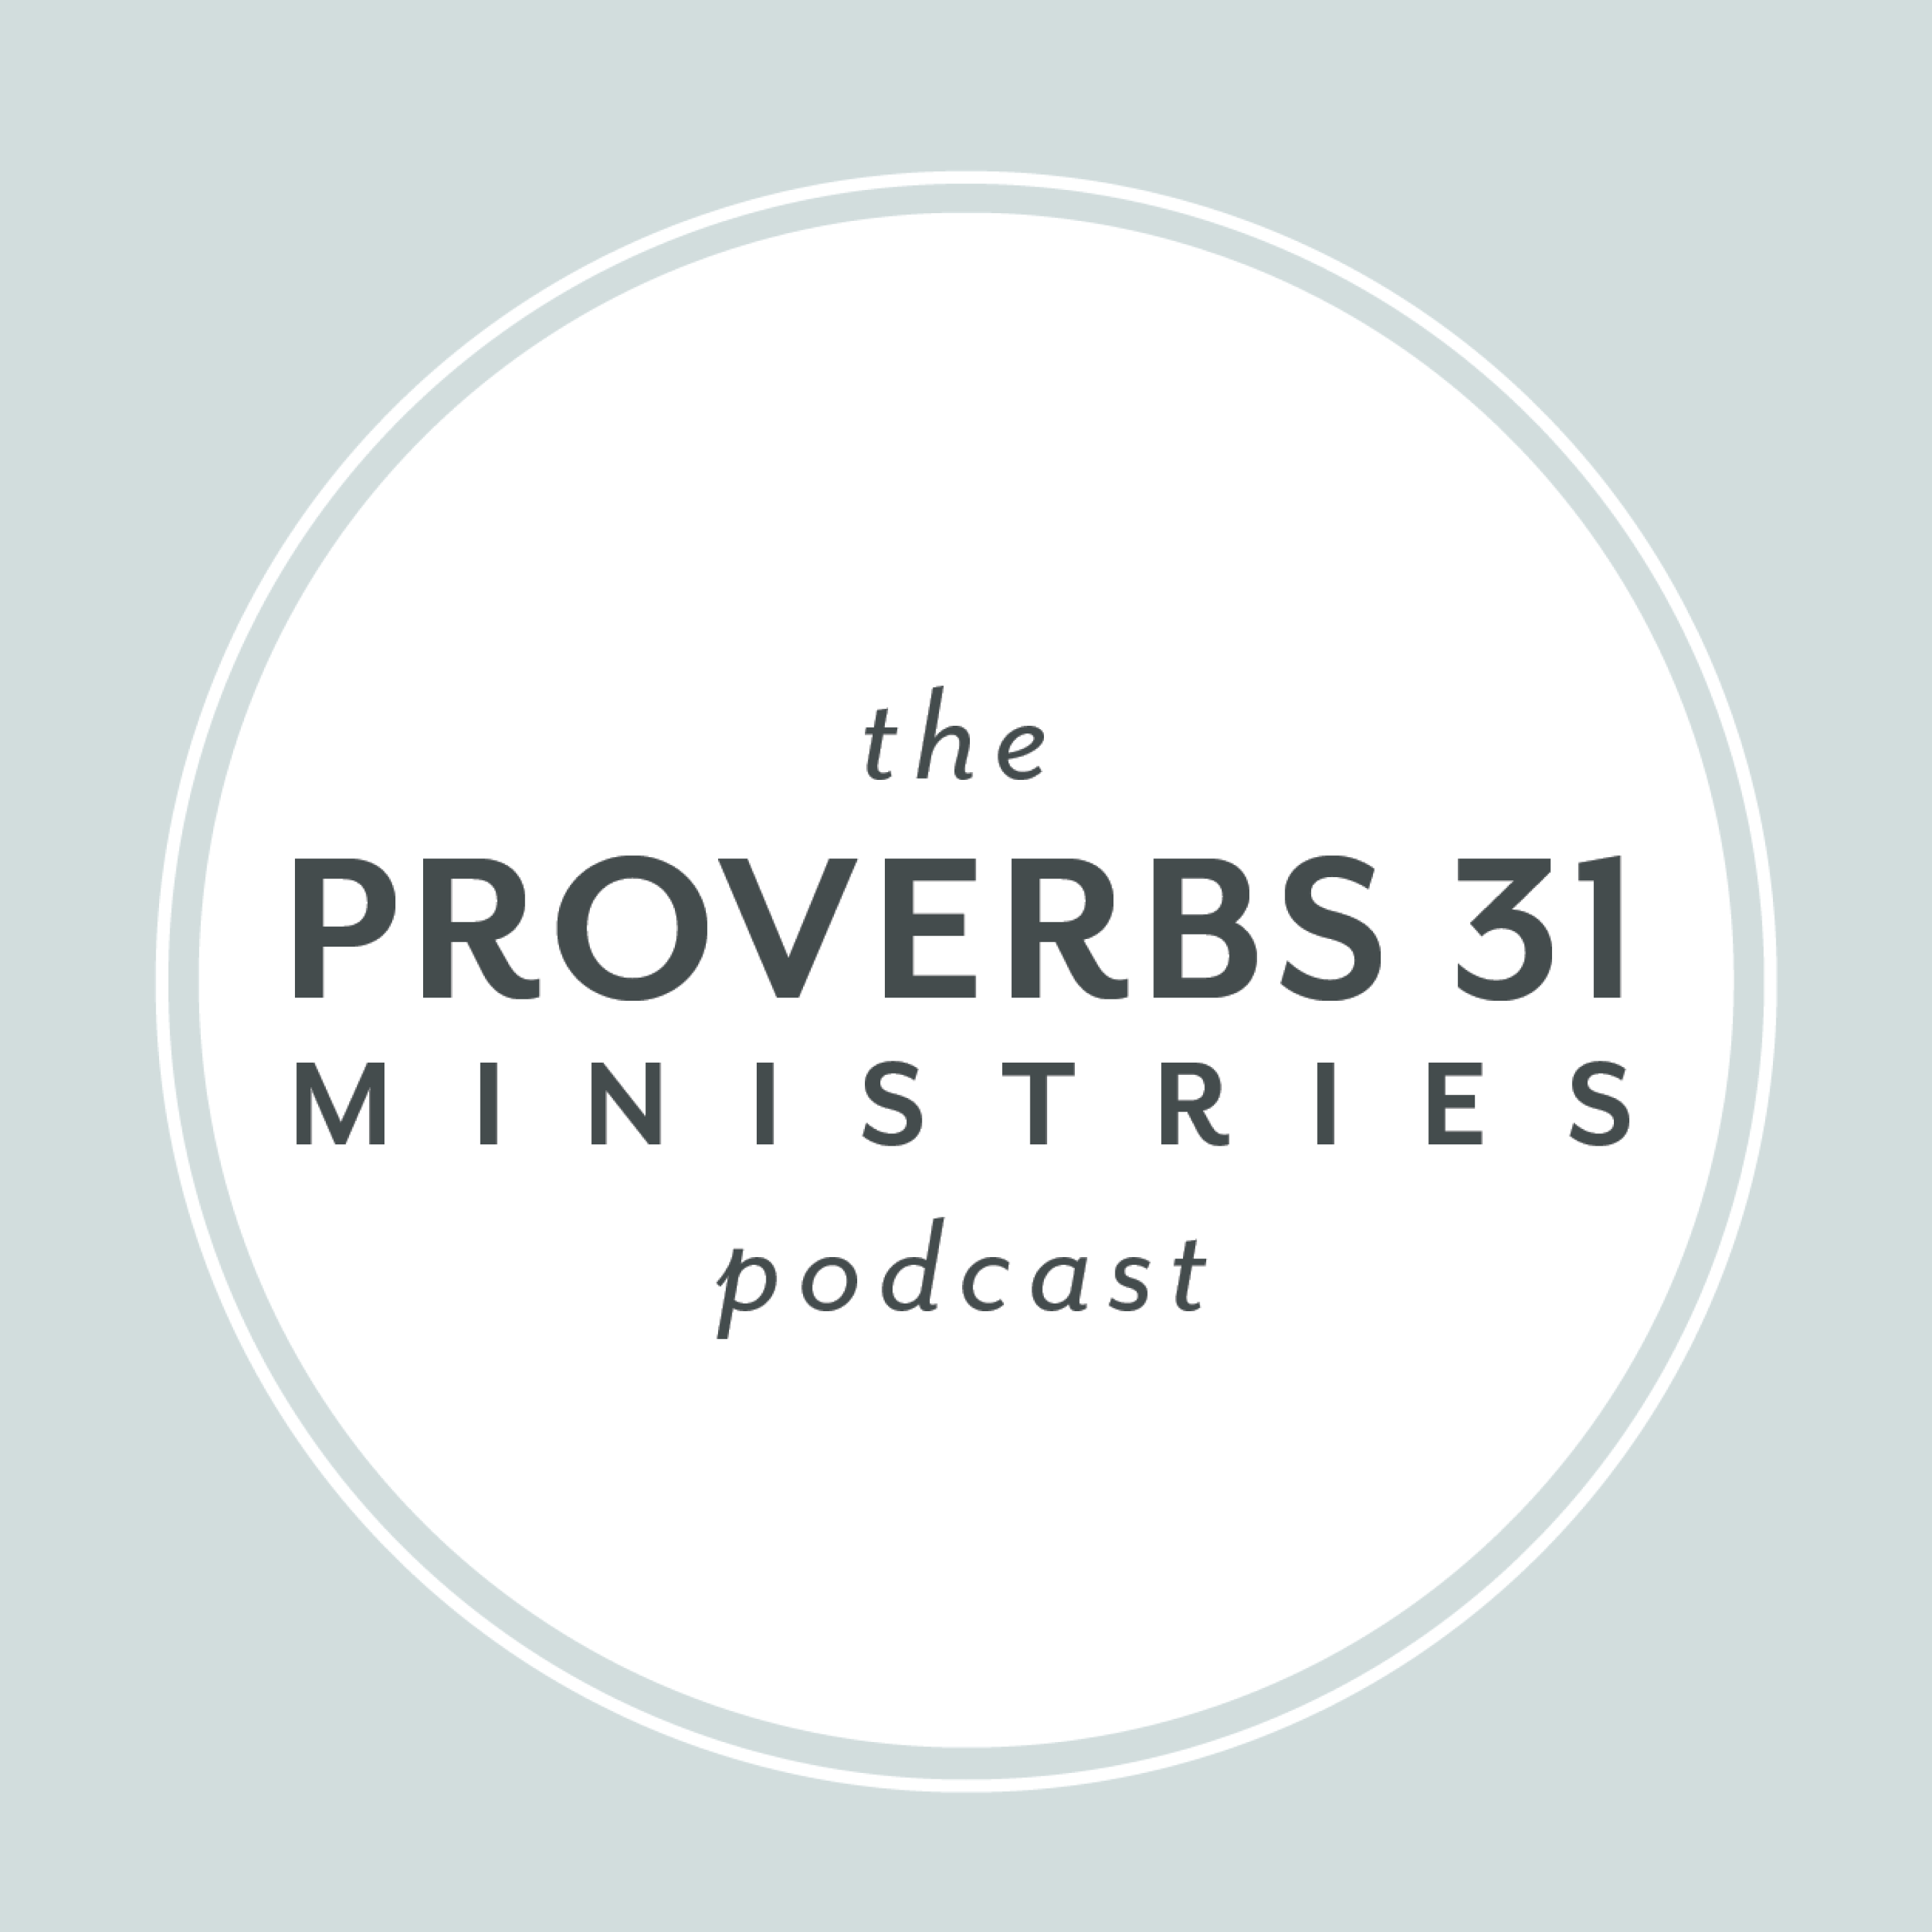 The Proverbs 31 Minutes Podcast